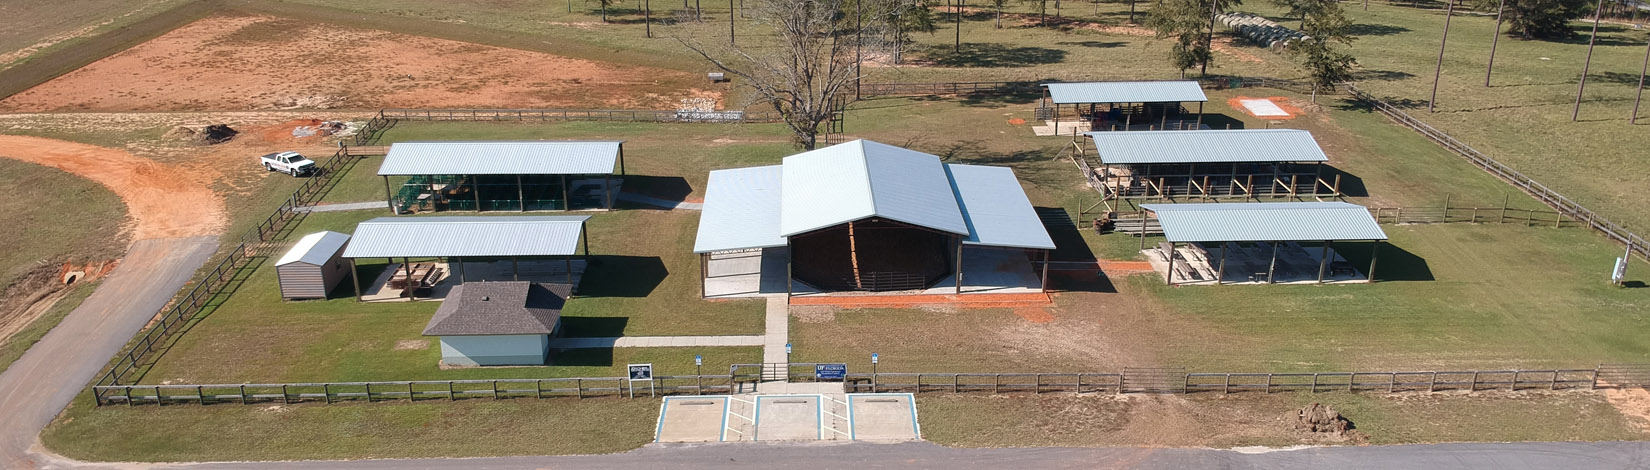 4-H aerial view of property